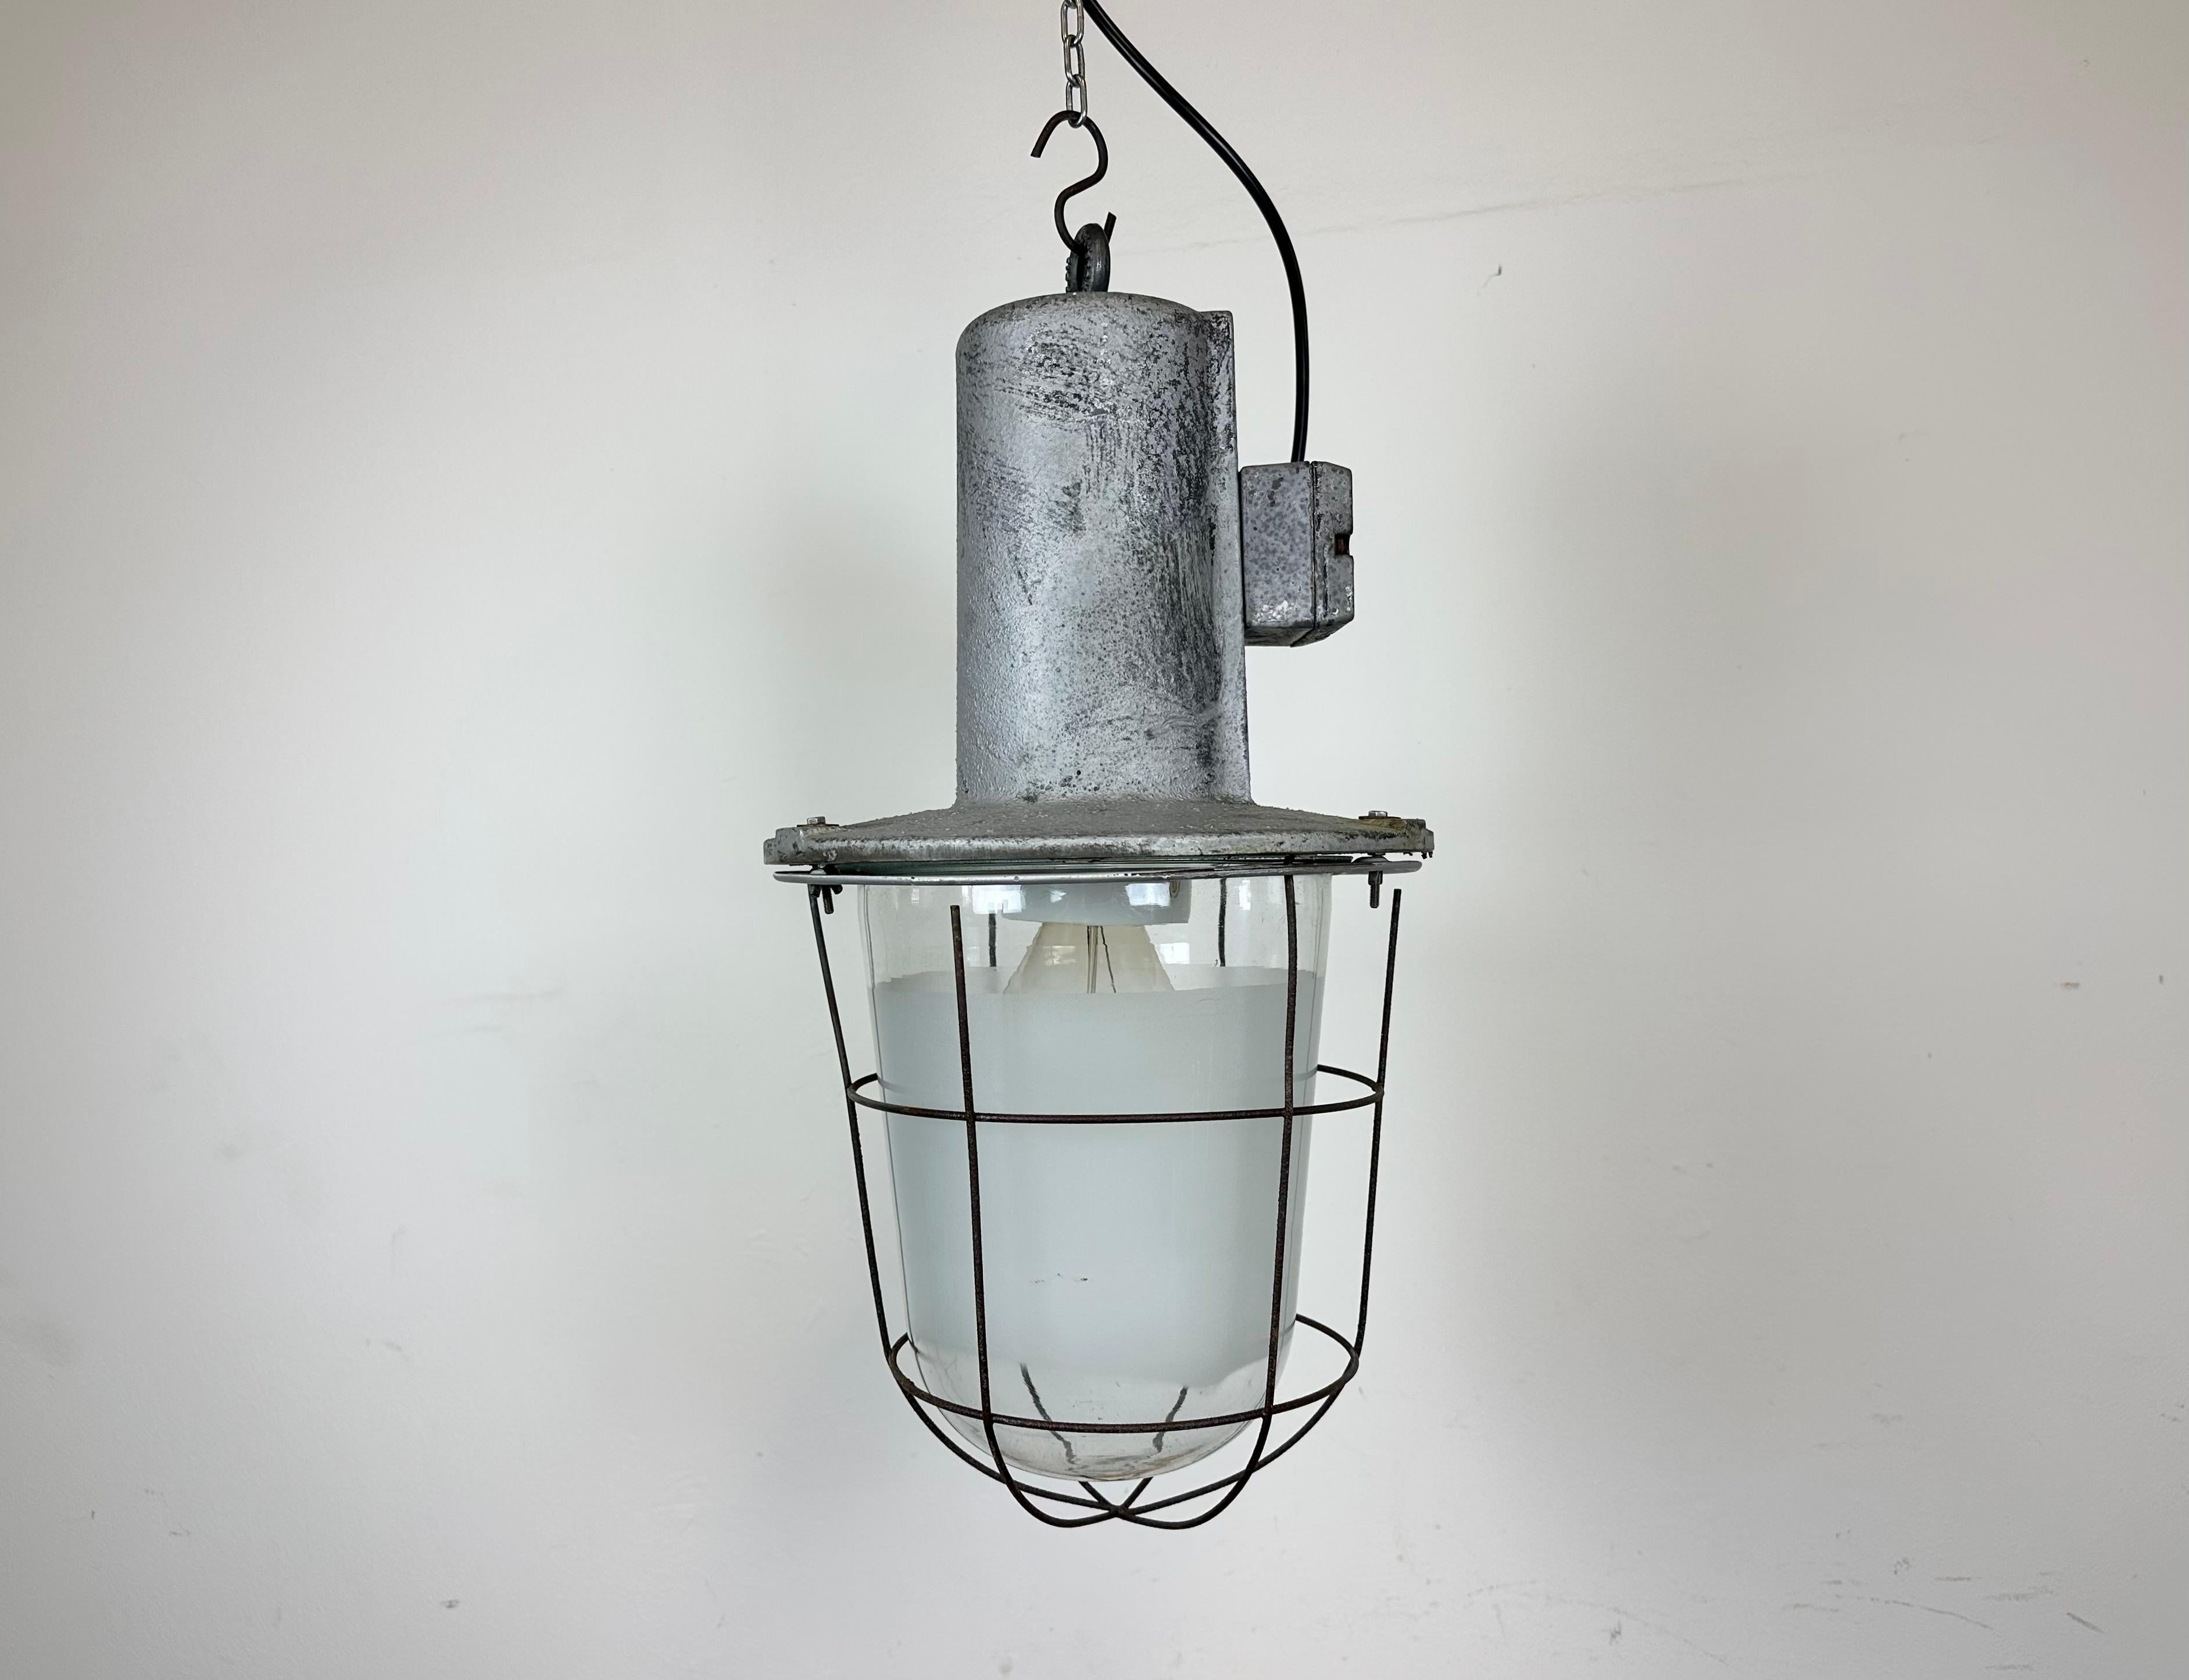 Large industrial factory hanging lamp made in former Czechoslovakia during the 1960s. It features a cast aluminium body, a partly clear glass and partly milk glass cover and an iron grid. The porcelain socket requires standard E 27/ E 26 lightbulbs.